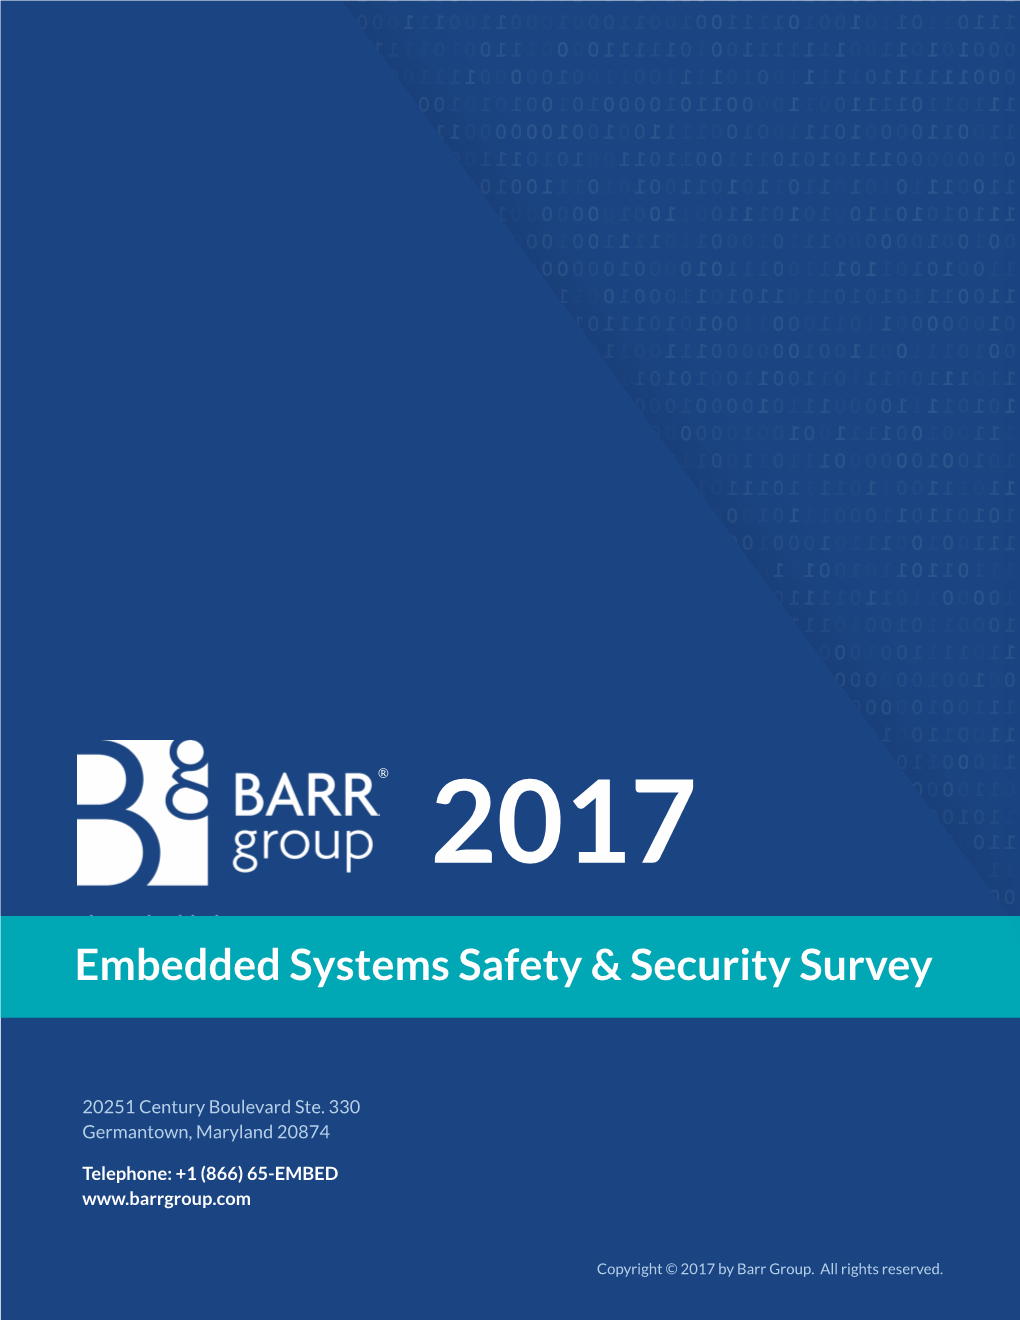 2017 Embedded Systems Safety & Security Survey